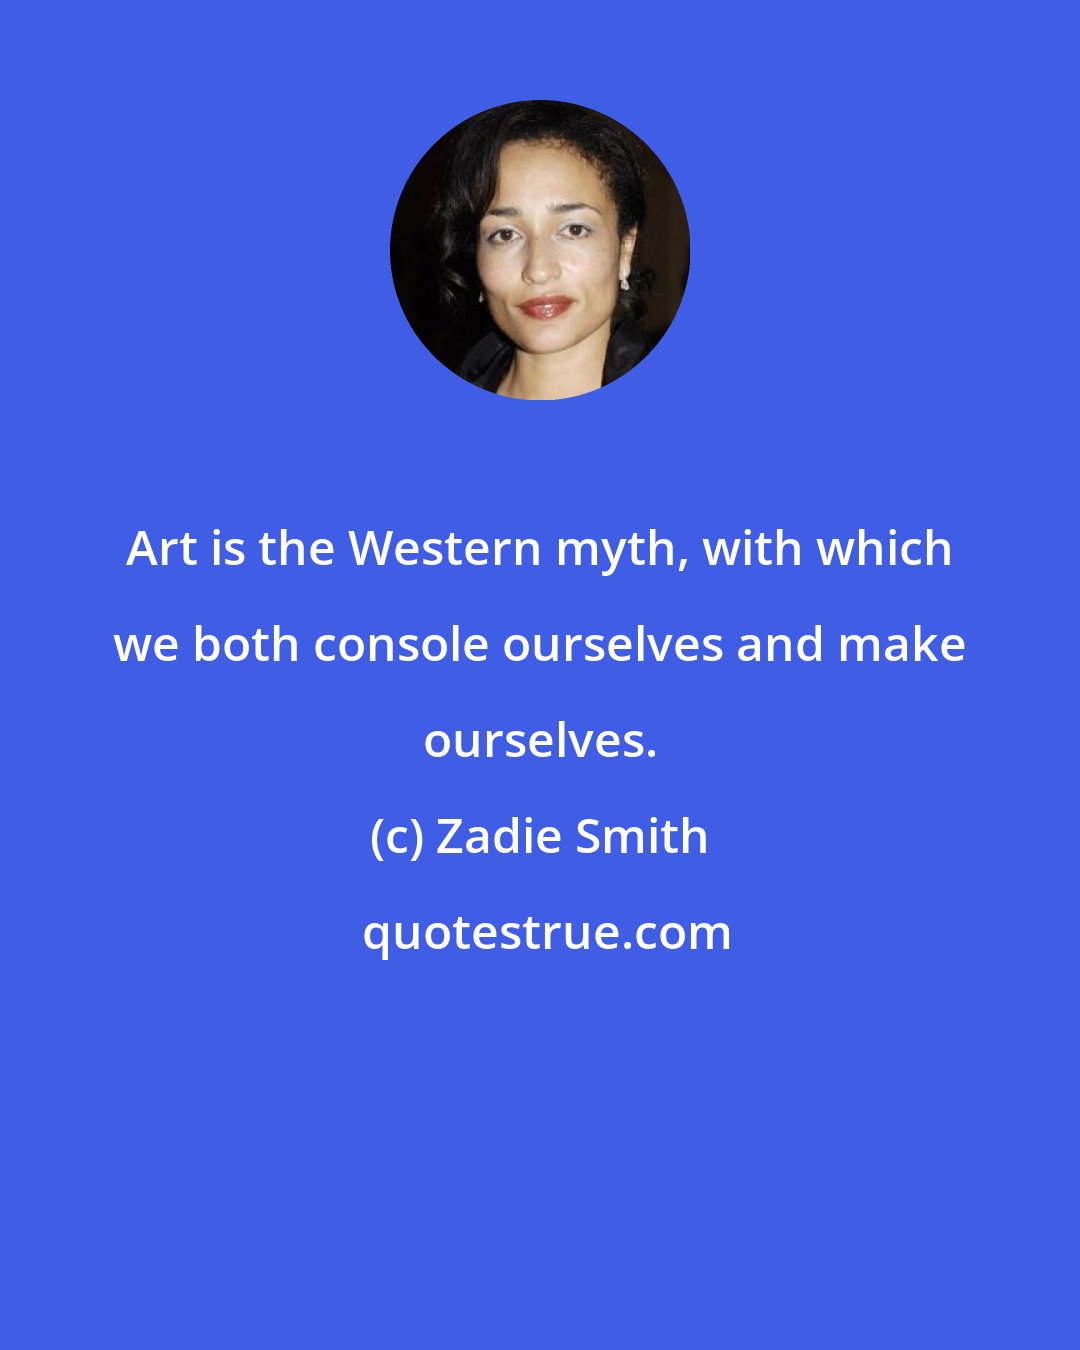 Zadie Smith: Art is the Western myth, with which we both console ourselves and make ourselves.